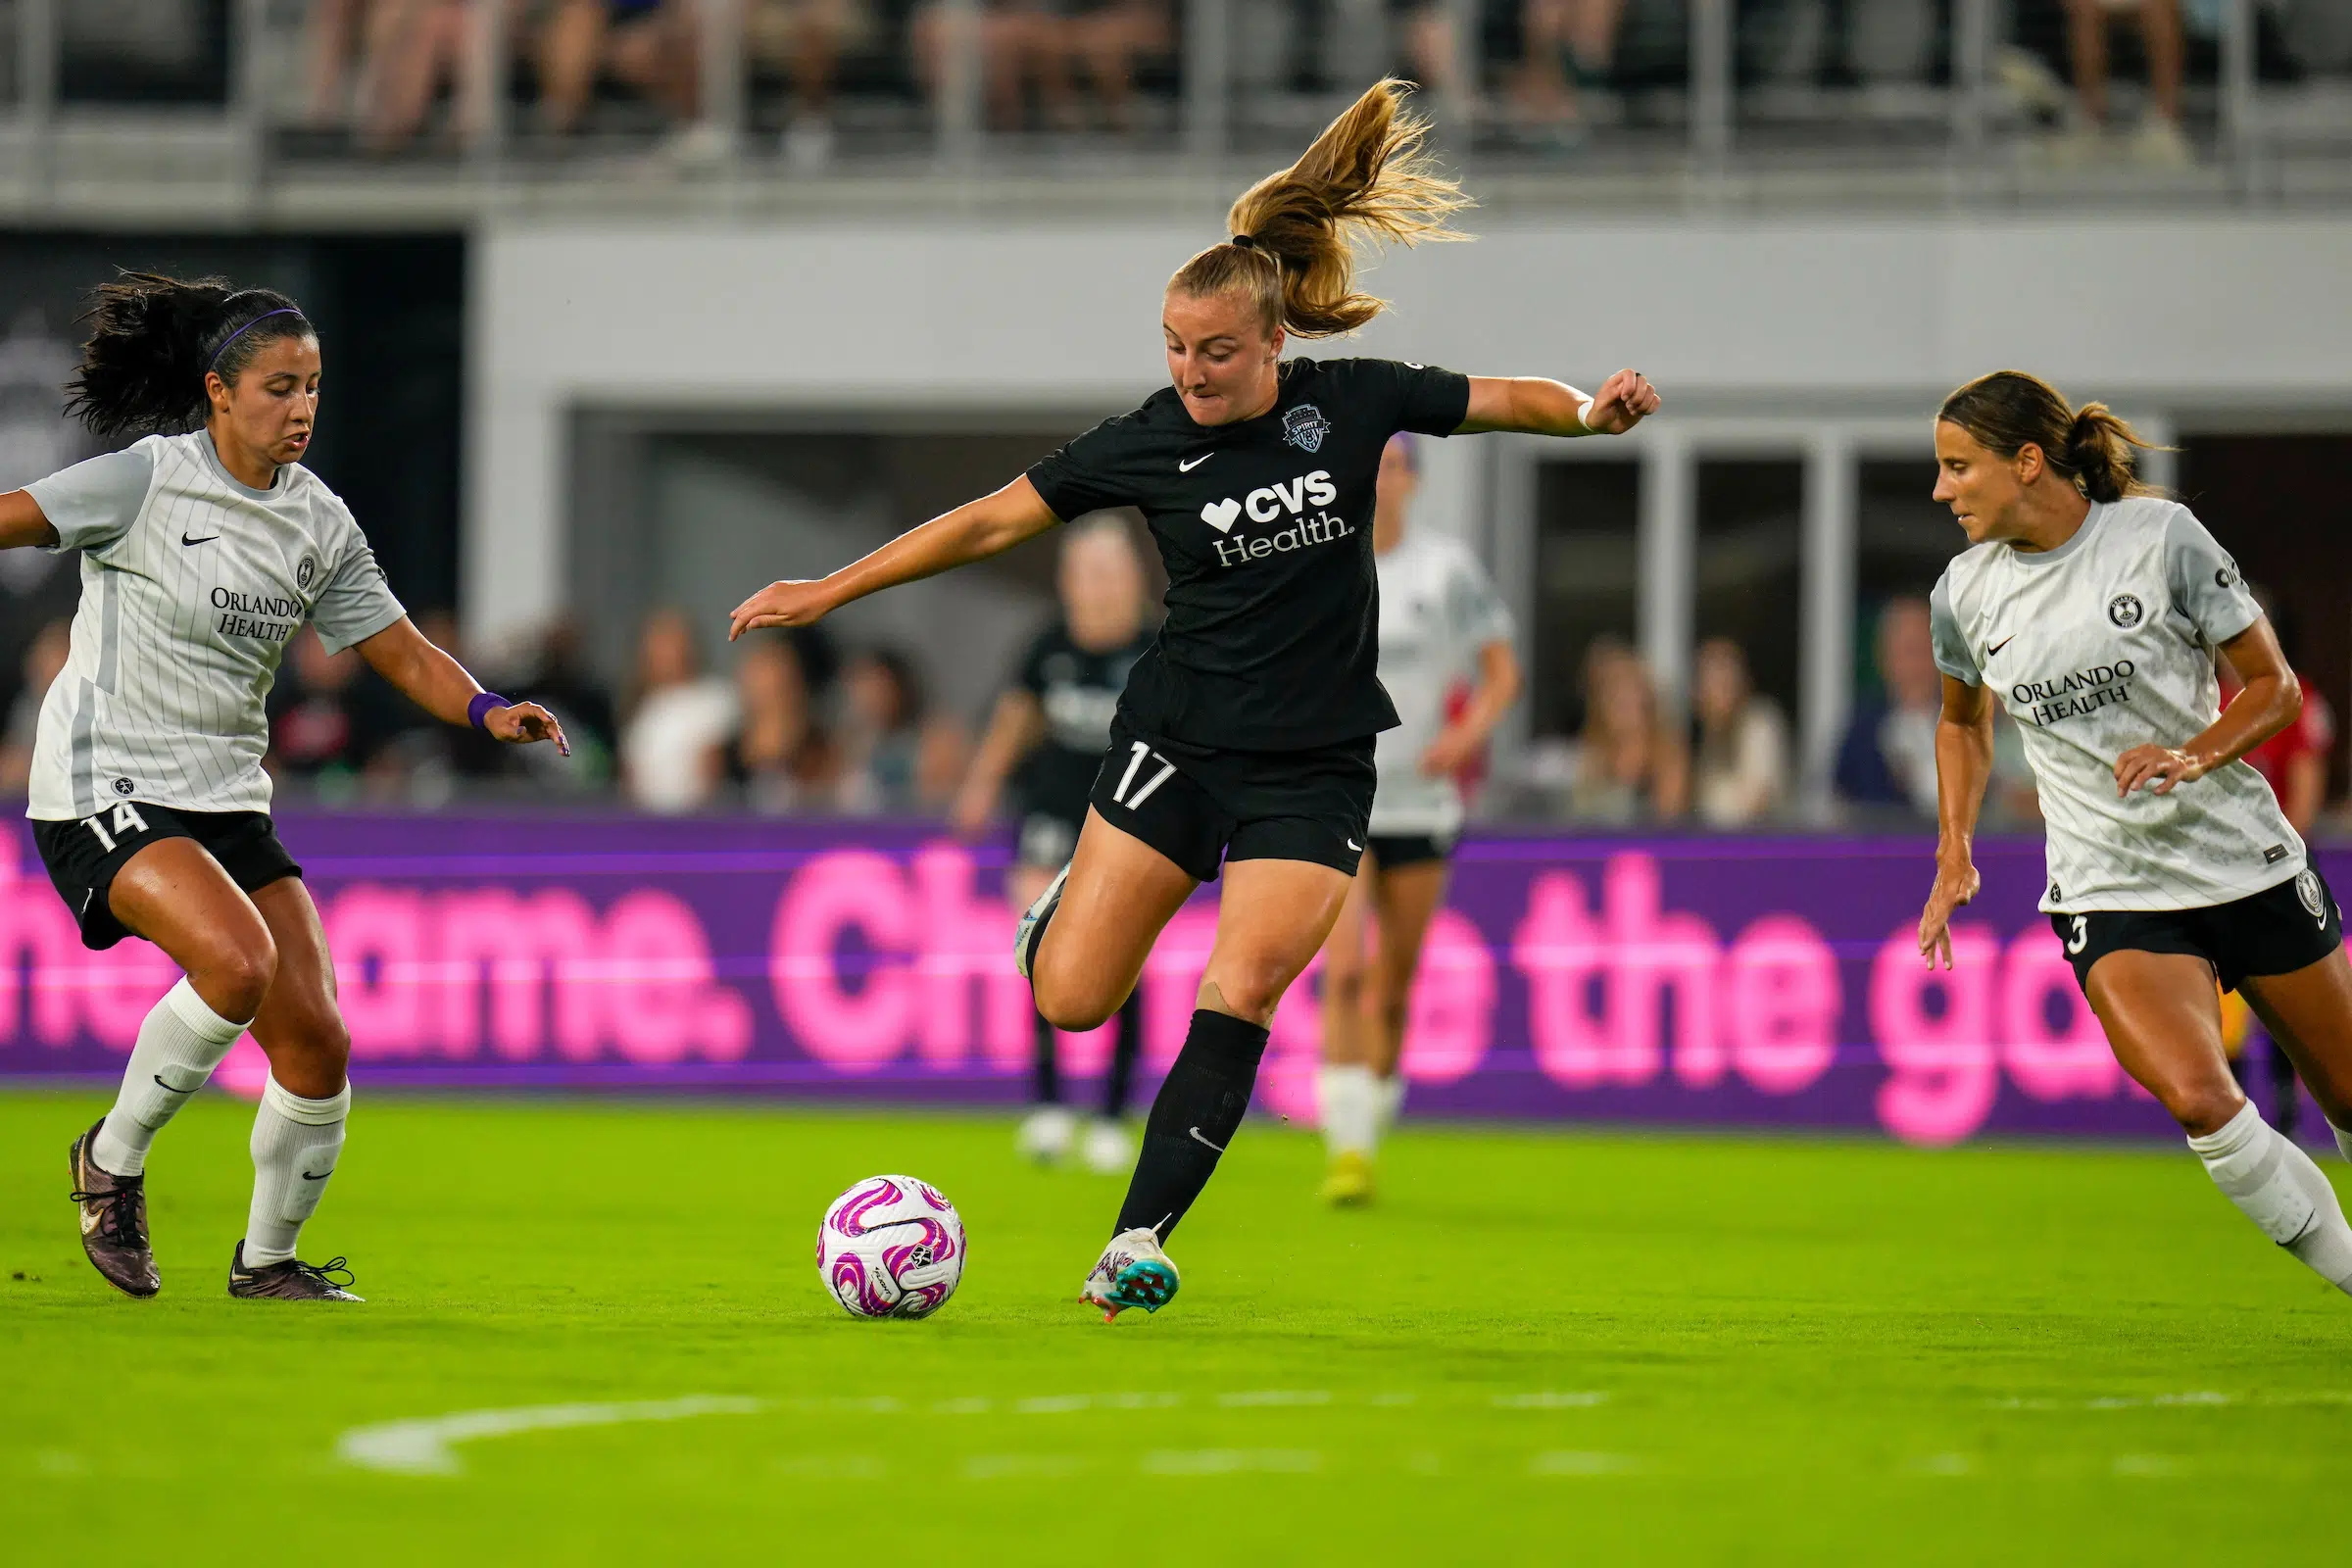 Nicole Douglas in an all black uniform dribbles the ball between two defenders in gray shirts and black shorts.